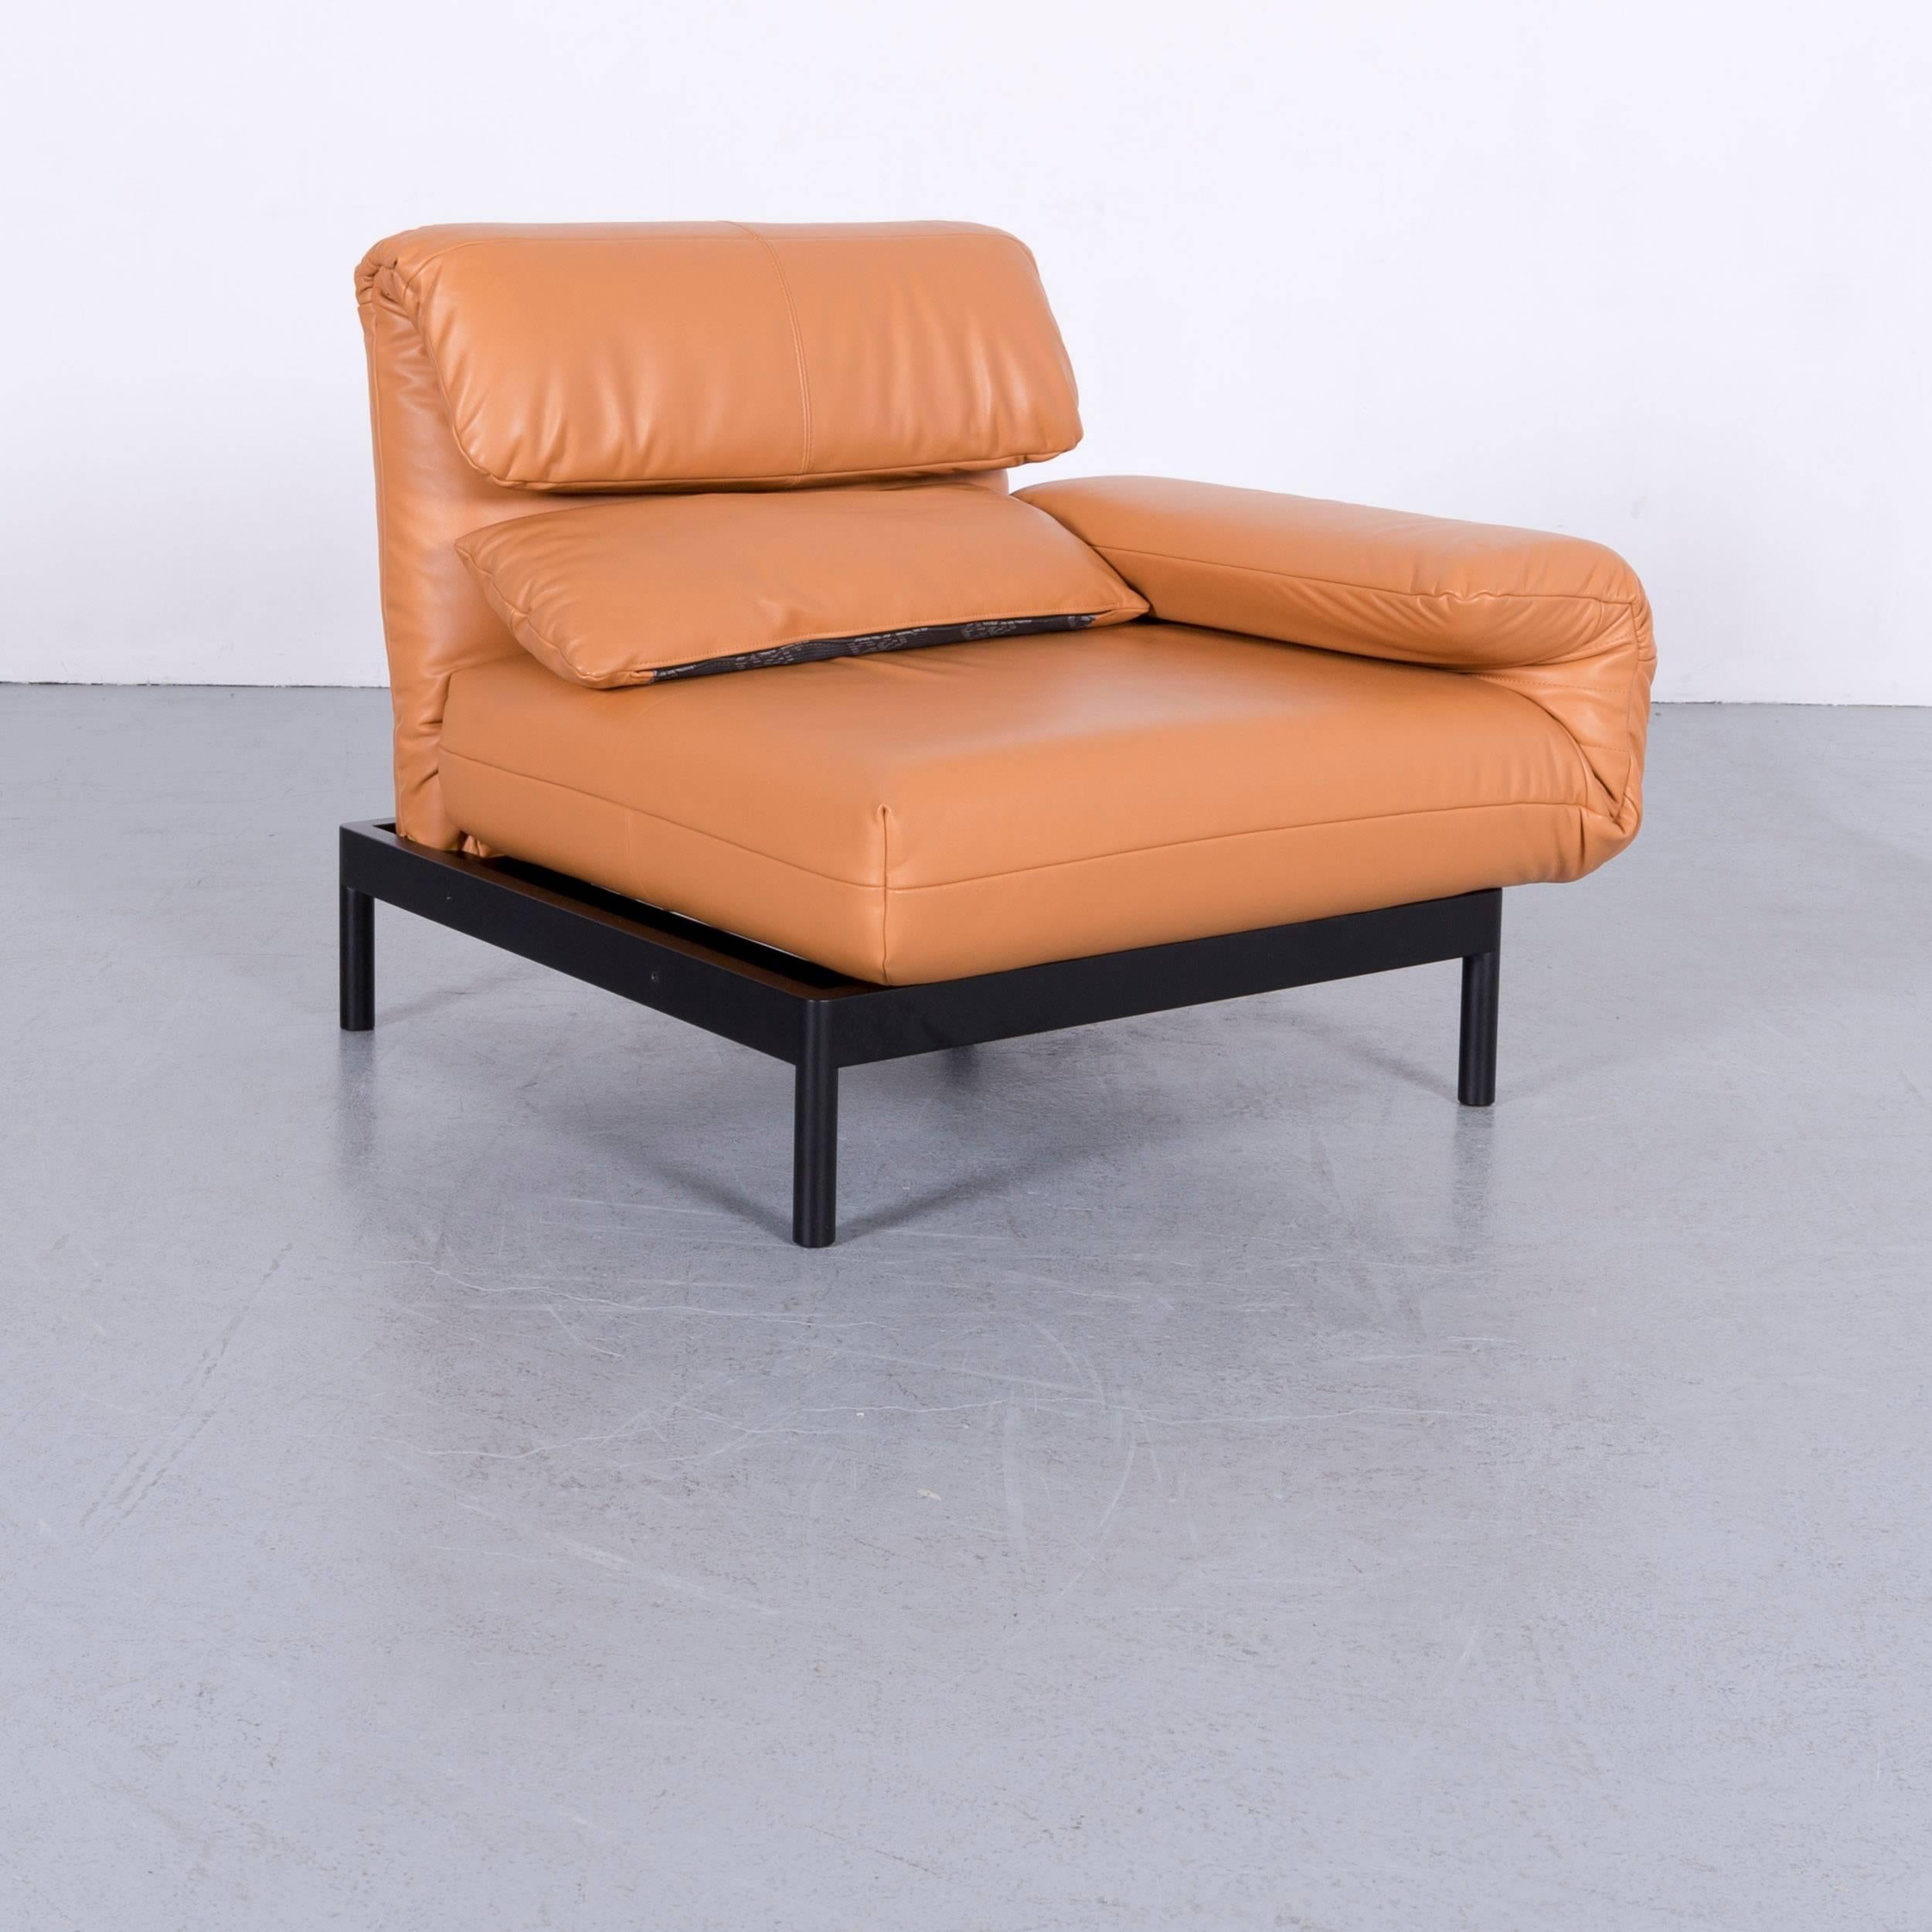 We bring to you an Rolf Benz Plura designer sofa leather orange yellow red armchairs.